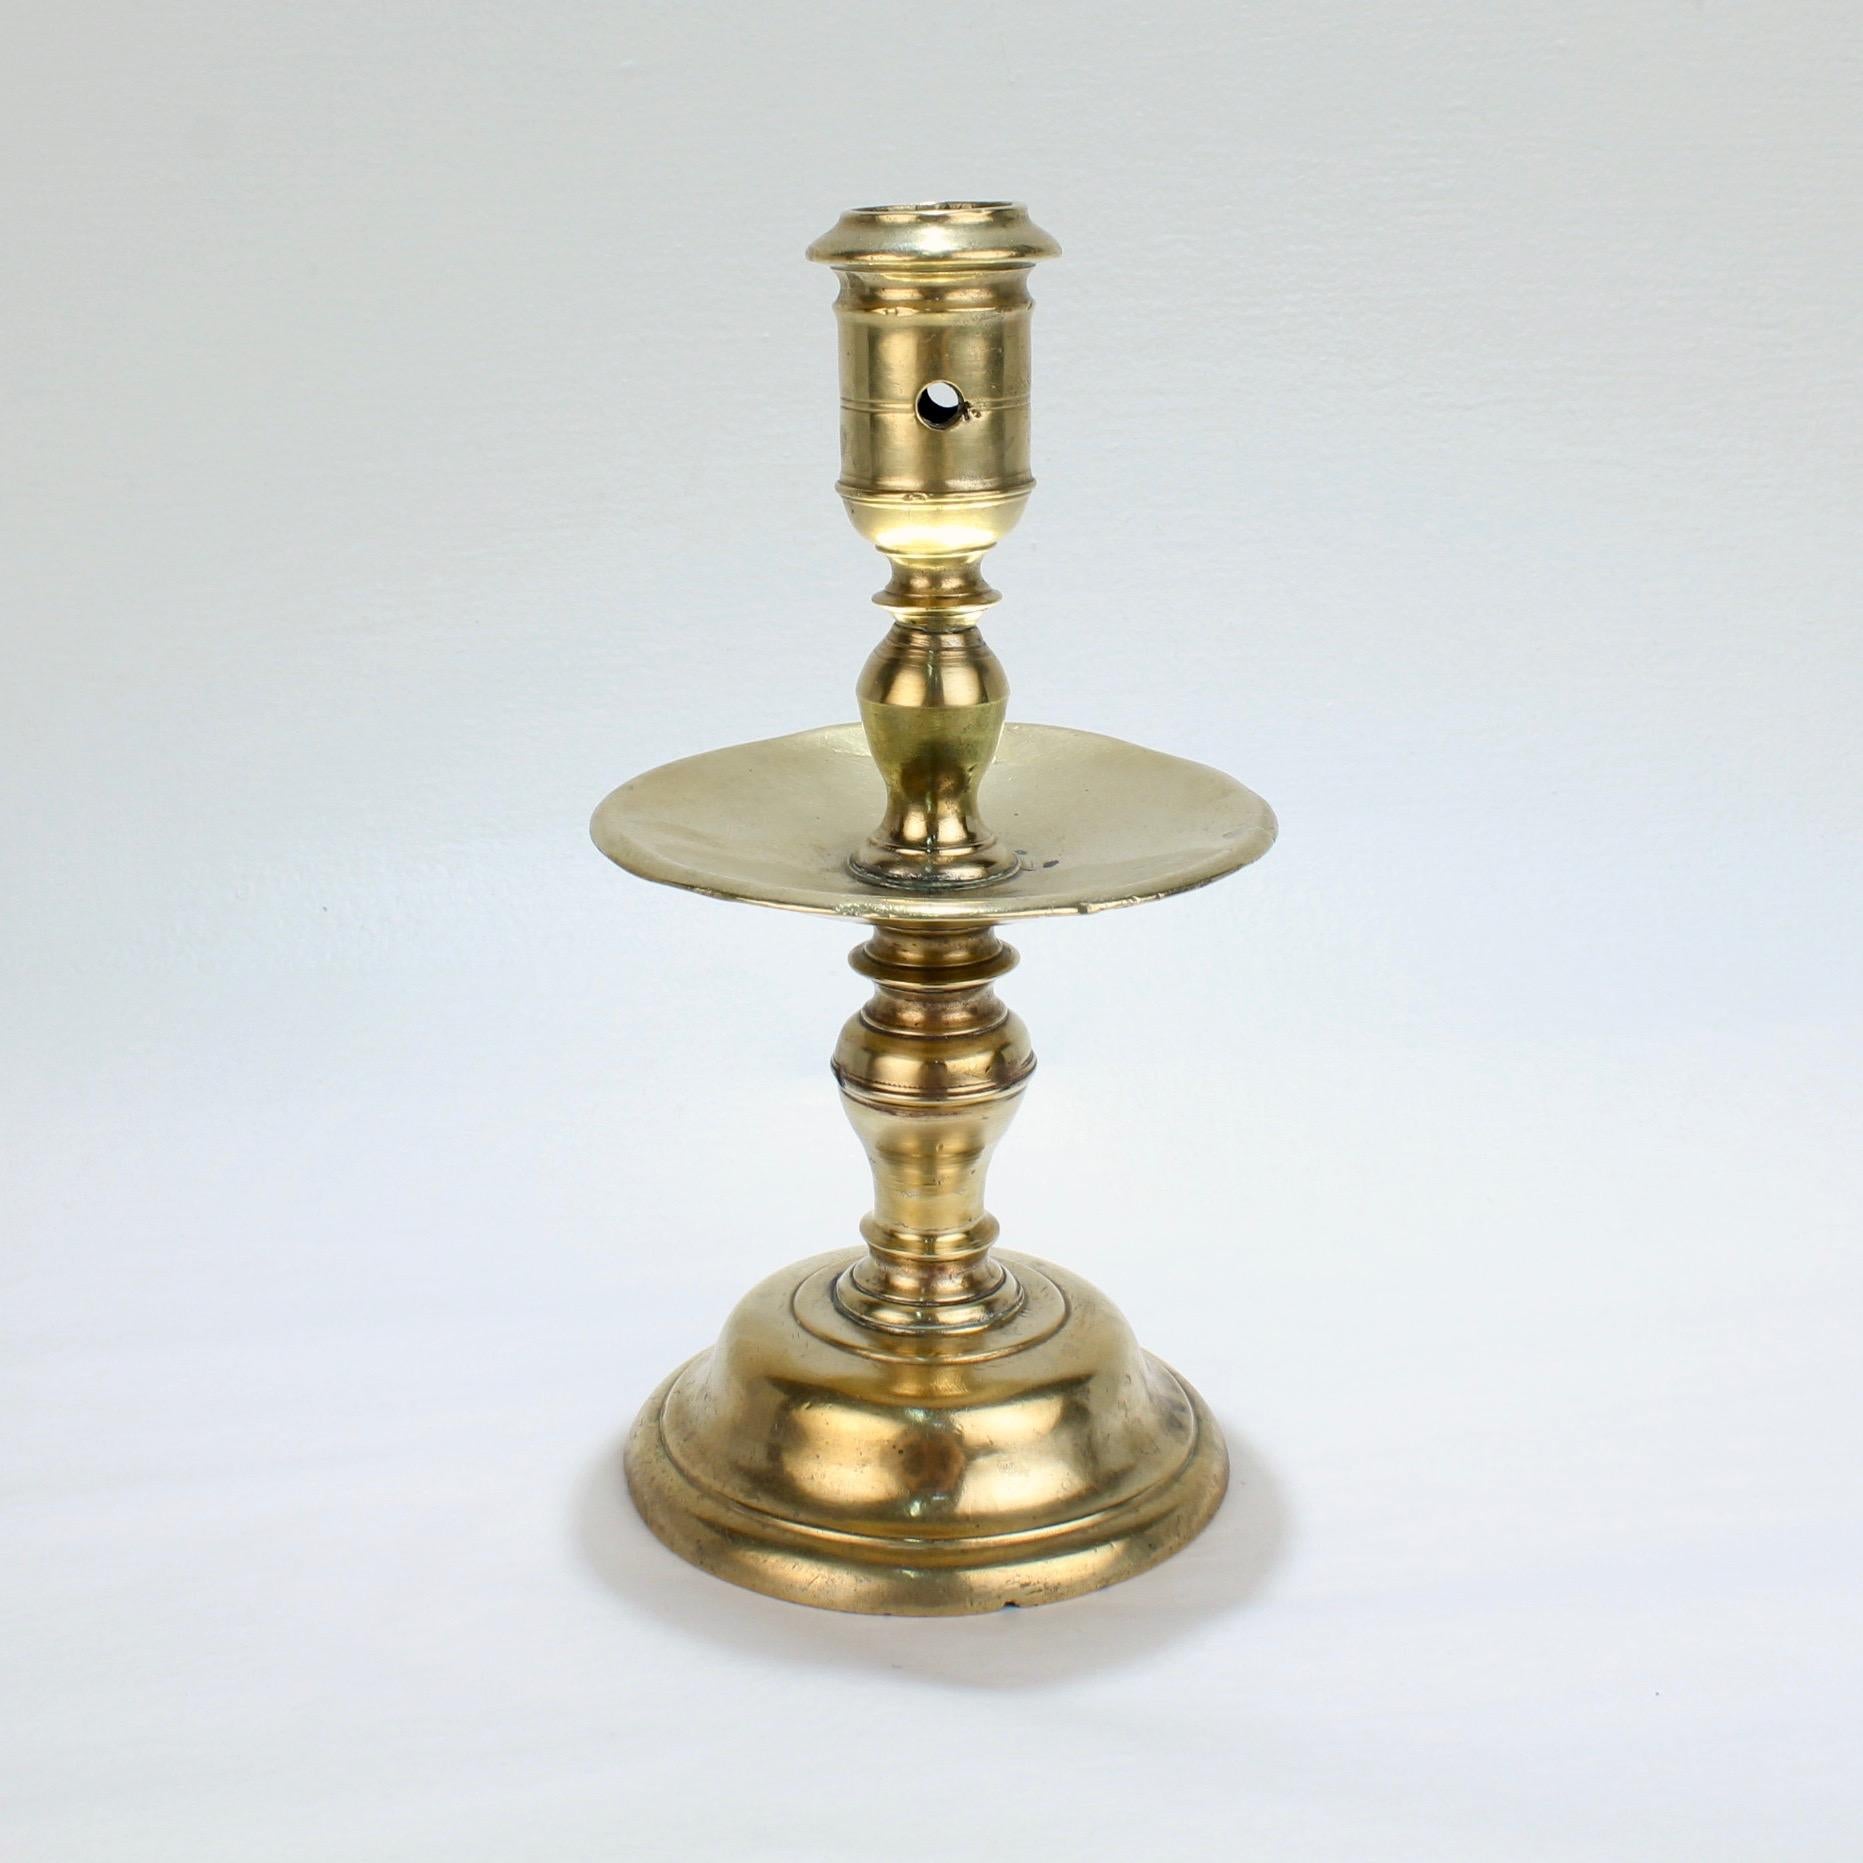 A fine 17th century Dutch brass candlestick.

With elegant baluster turnings, a medial drip pan, and a hole for removing wax.

A rare model and a Fine example for any collection!

Measures: Height: ca. 8 in.

Items purchased from this dealer